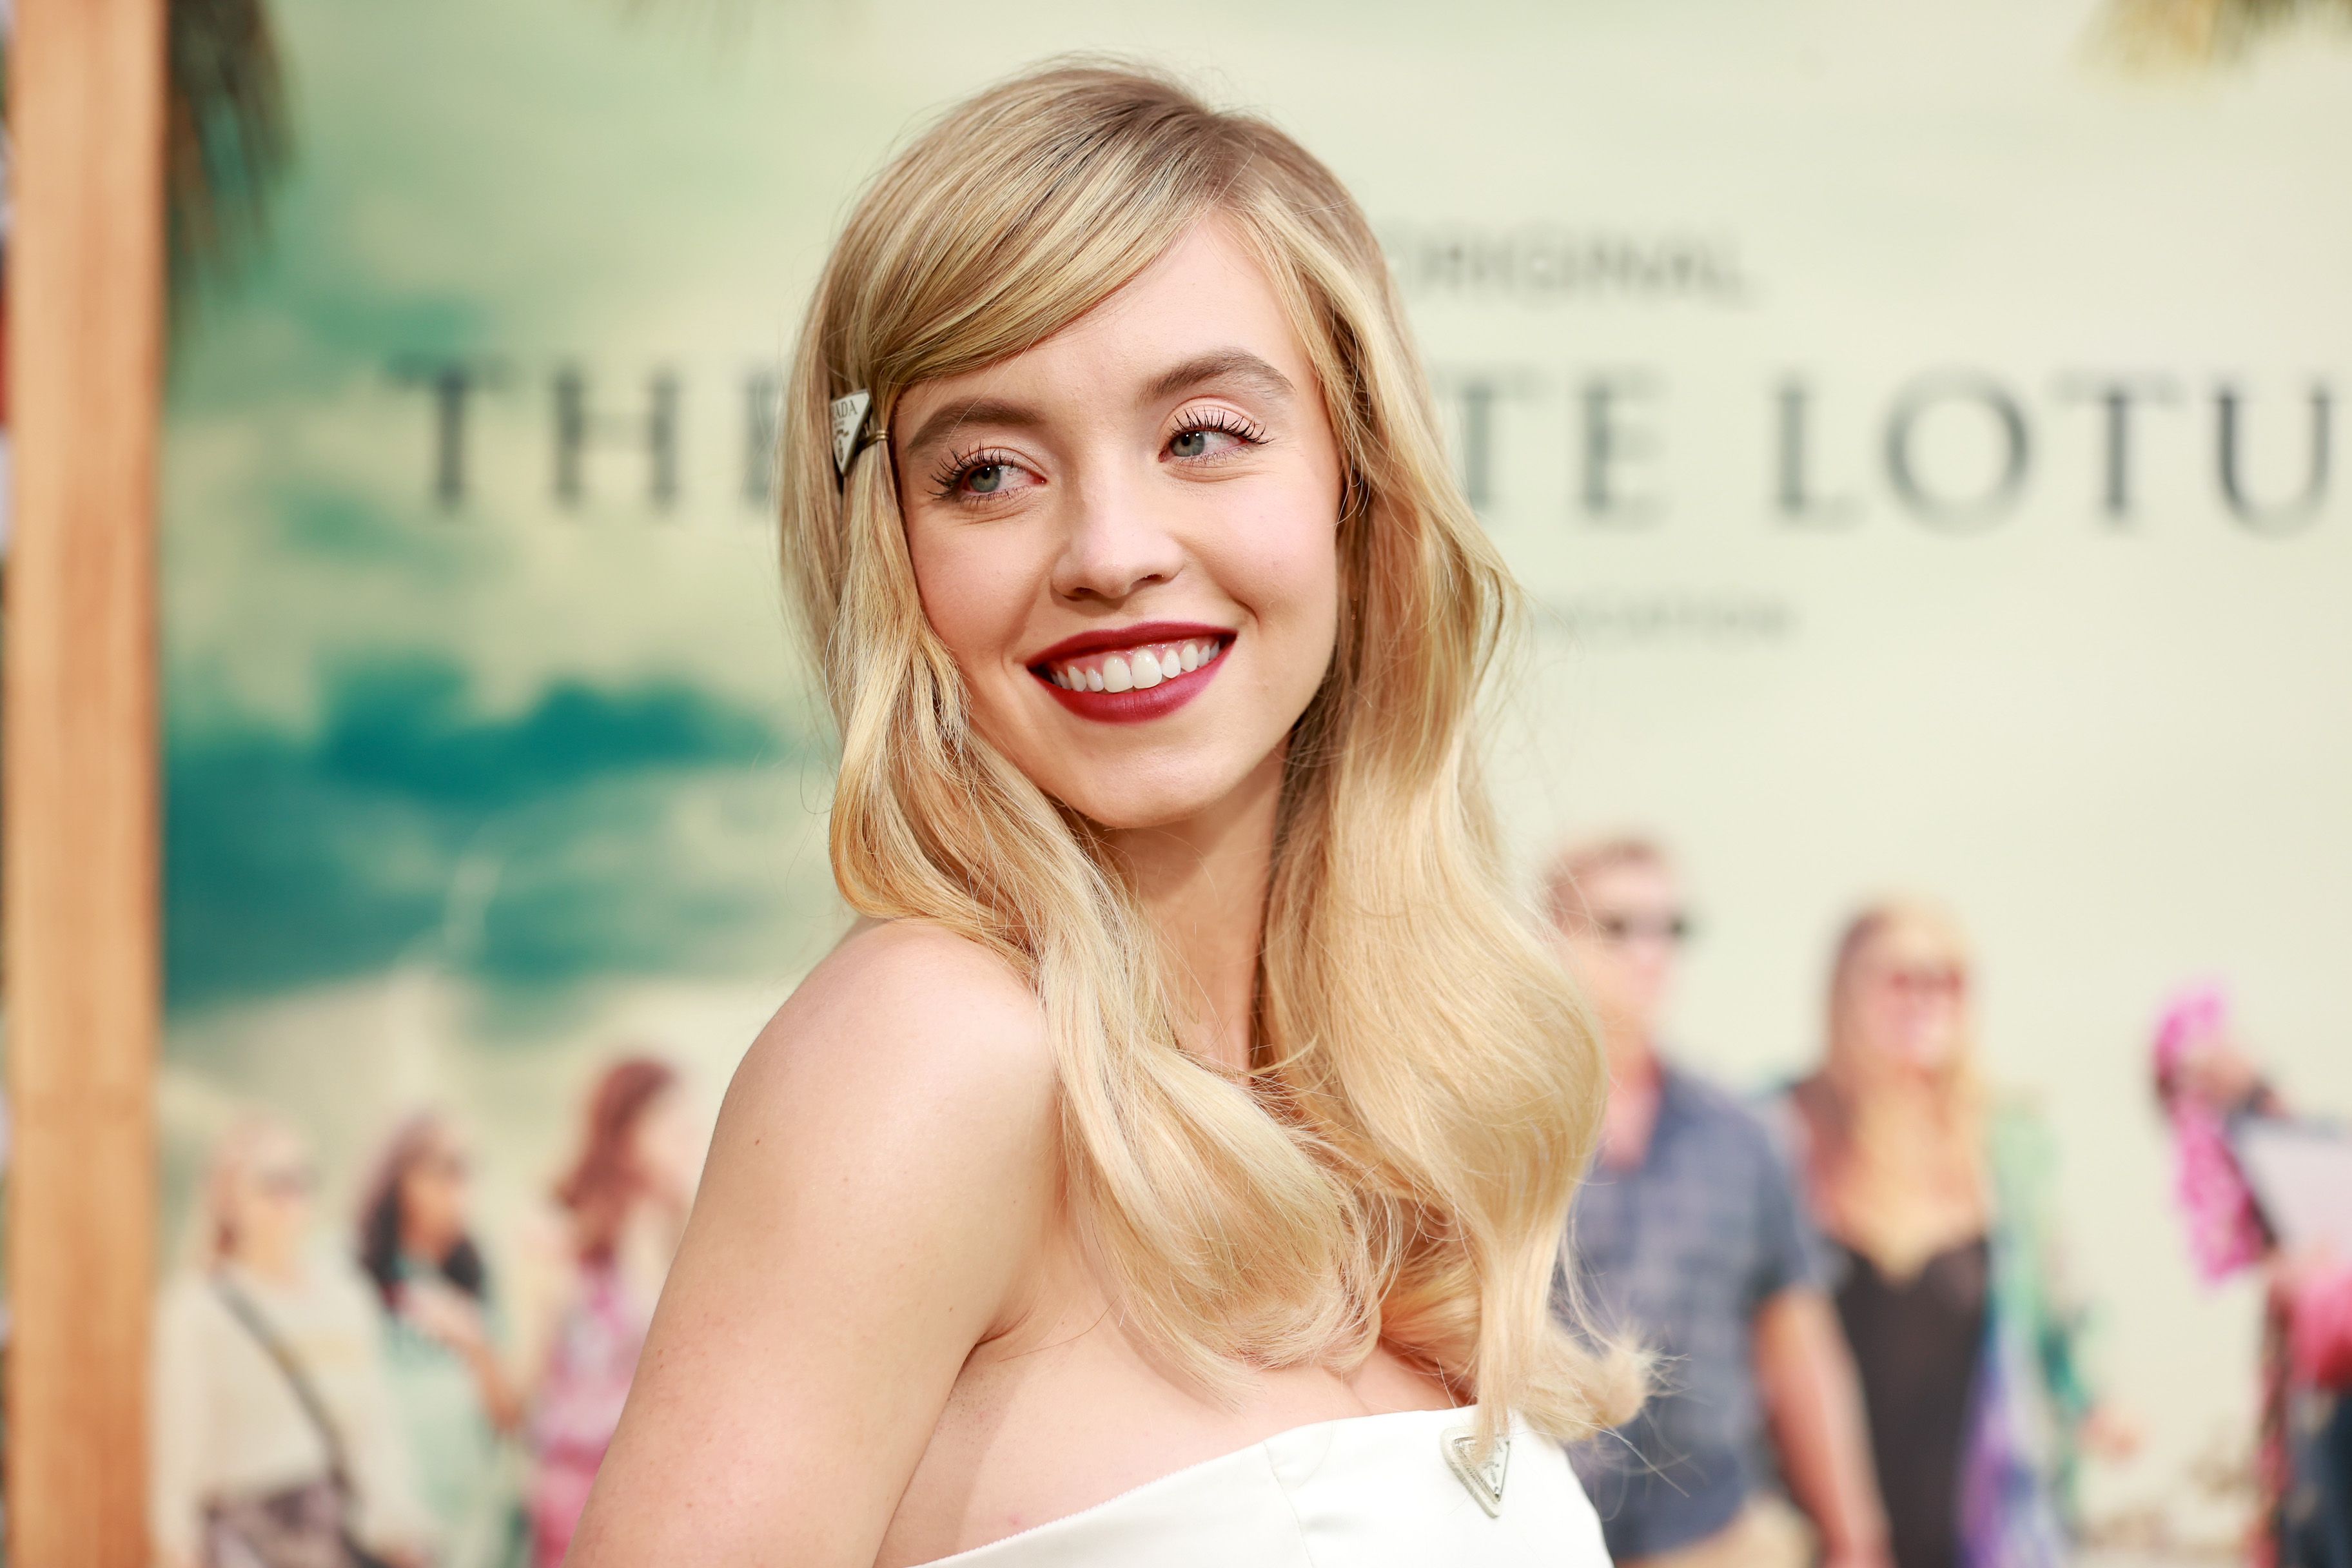 Sydney Sweeney age 23 arrives to 'The White Lotus' premiere in Los Angeles in a white dress